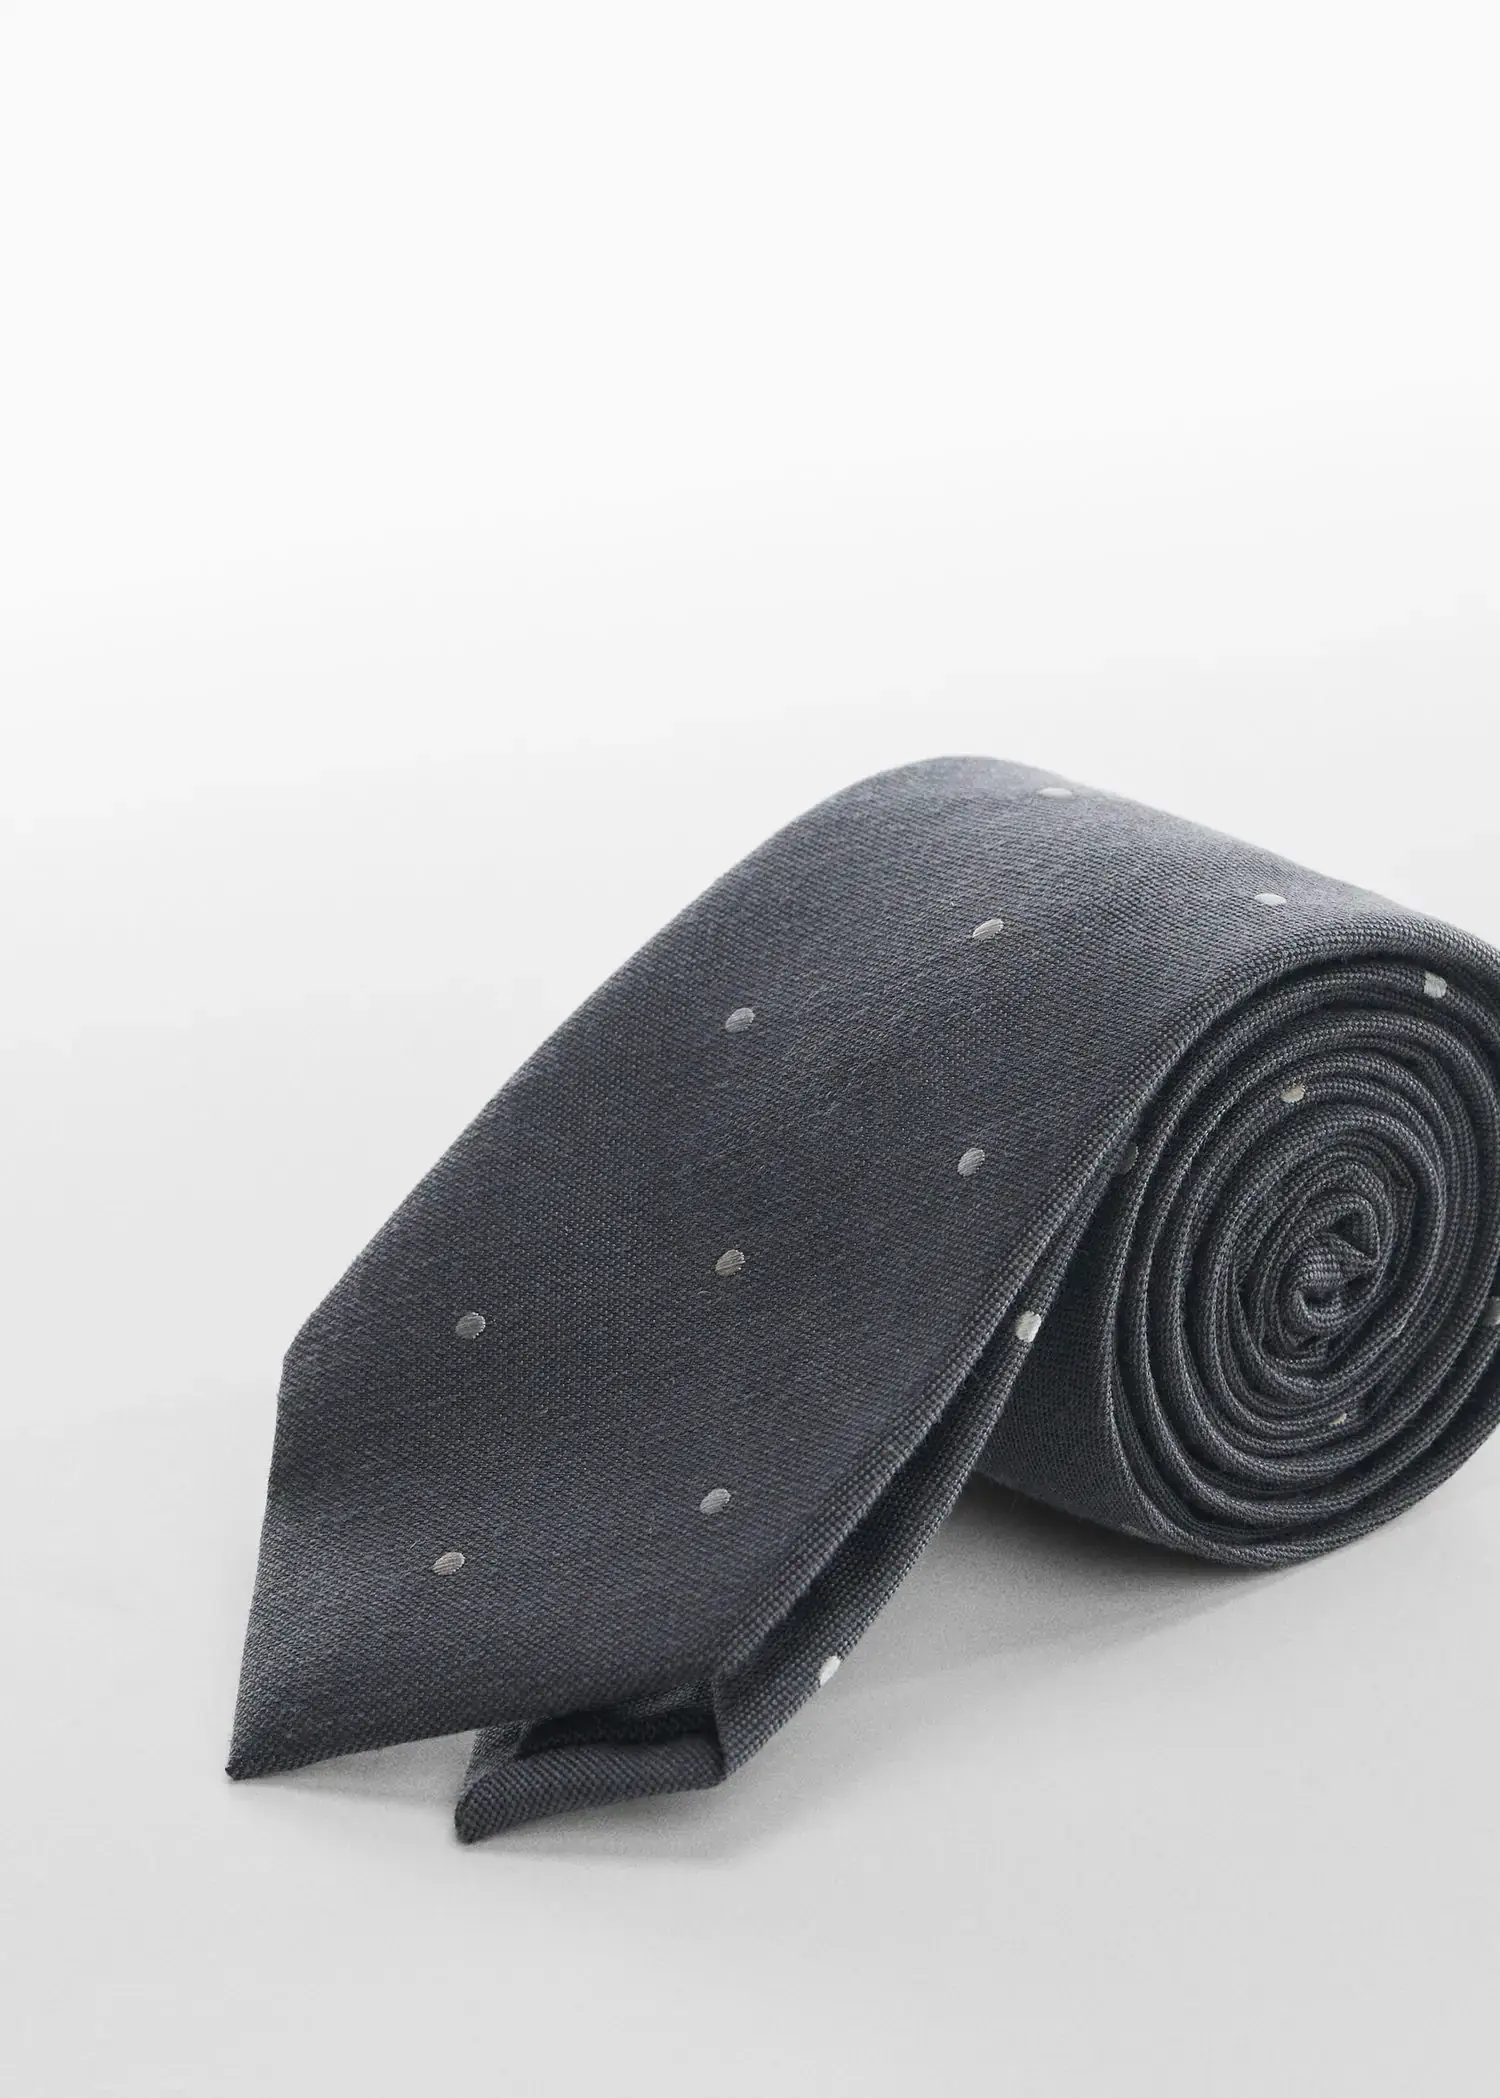 Mango Polka-dot patterned tie. a black tie with white polka dots on it. 